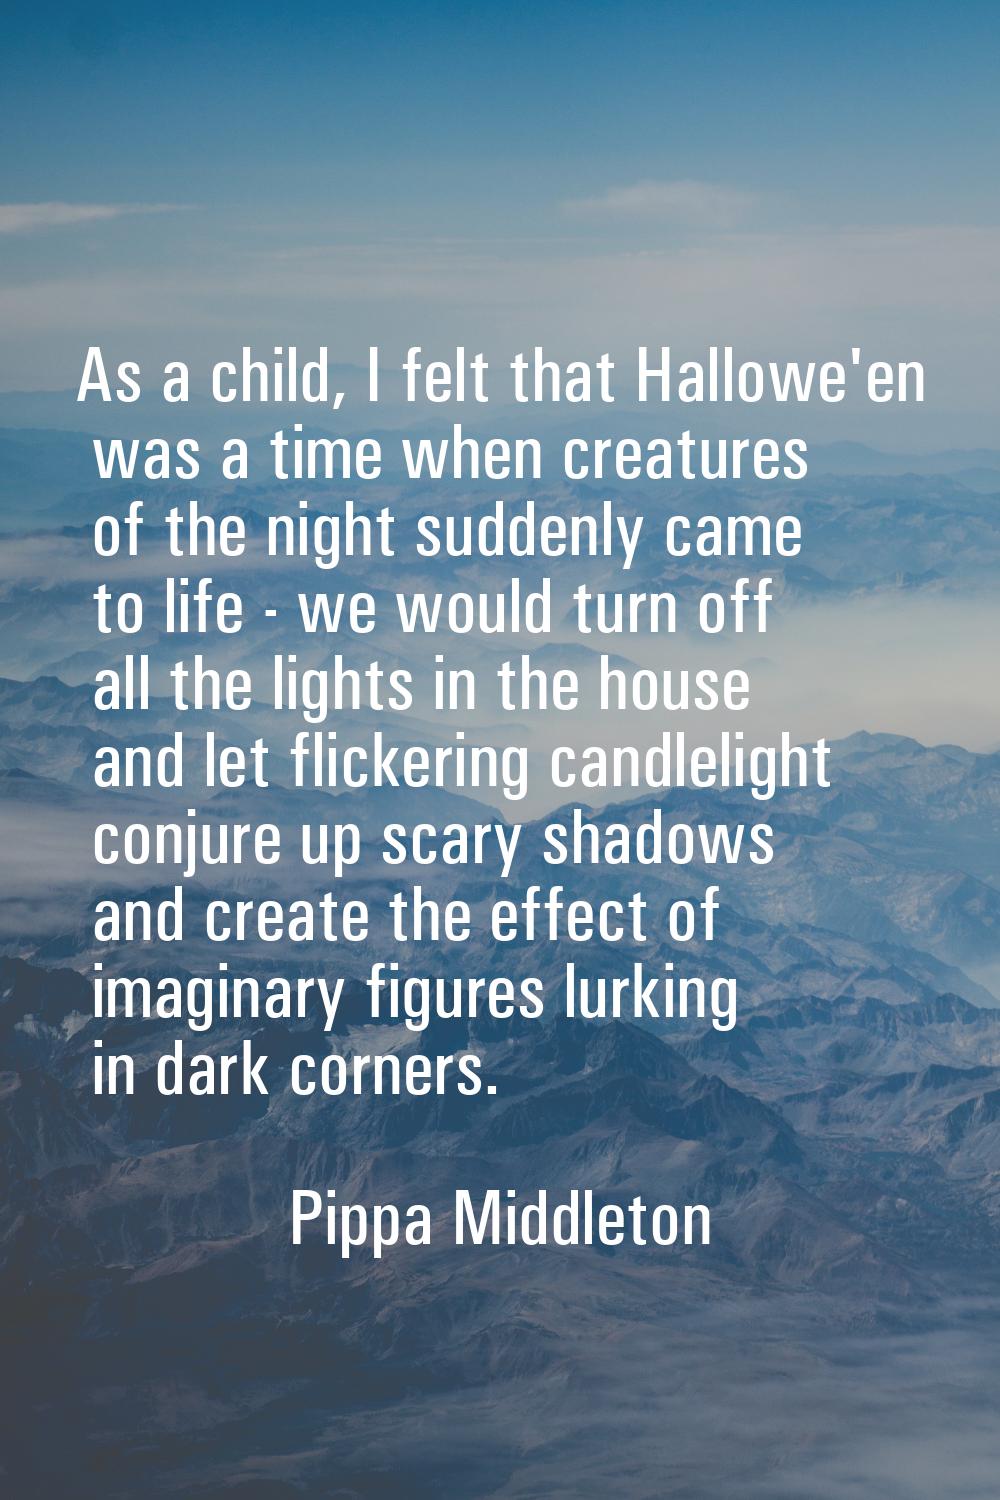 As a child, I felt that Hallowe'en was a time when creatures of the night suddenly came to life - w